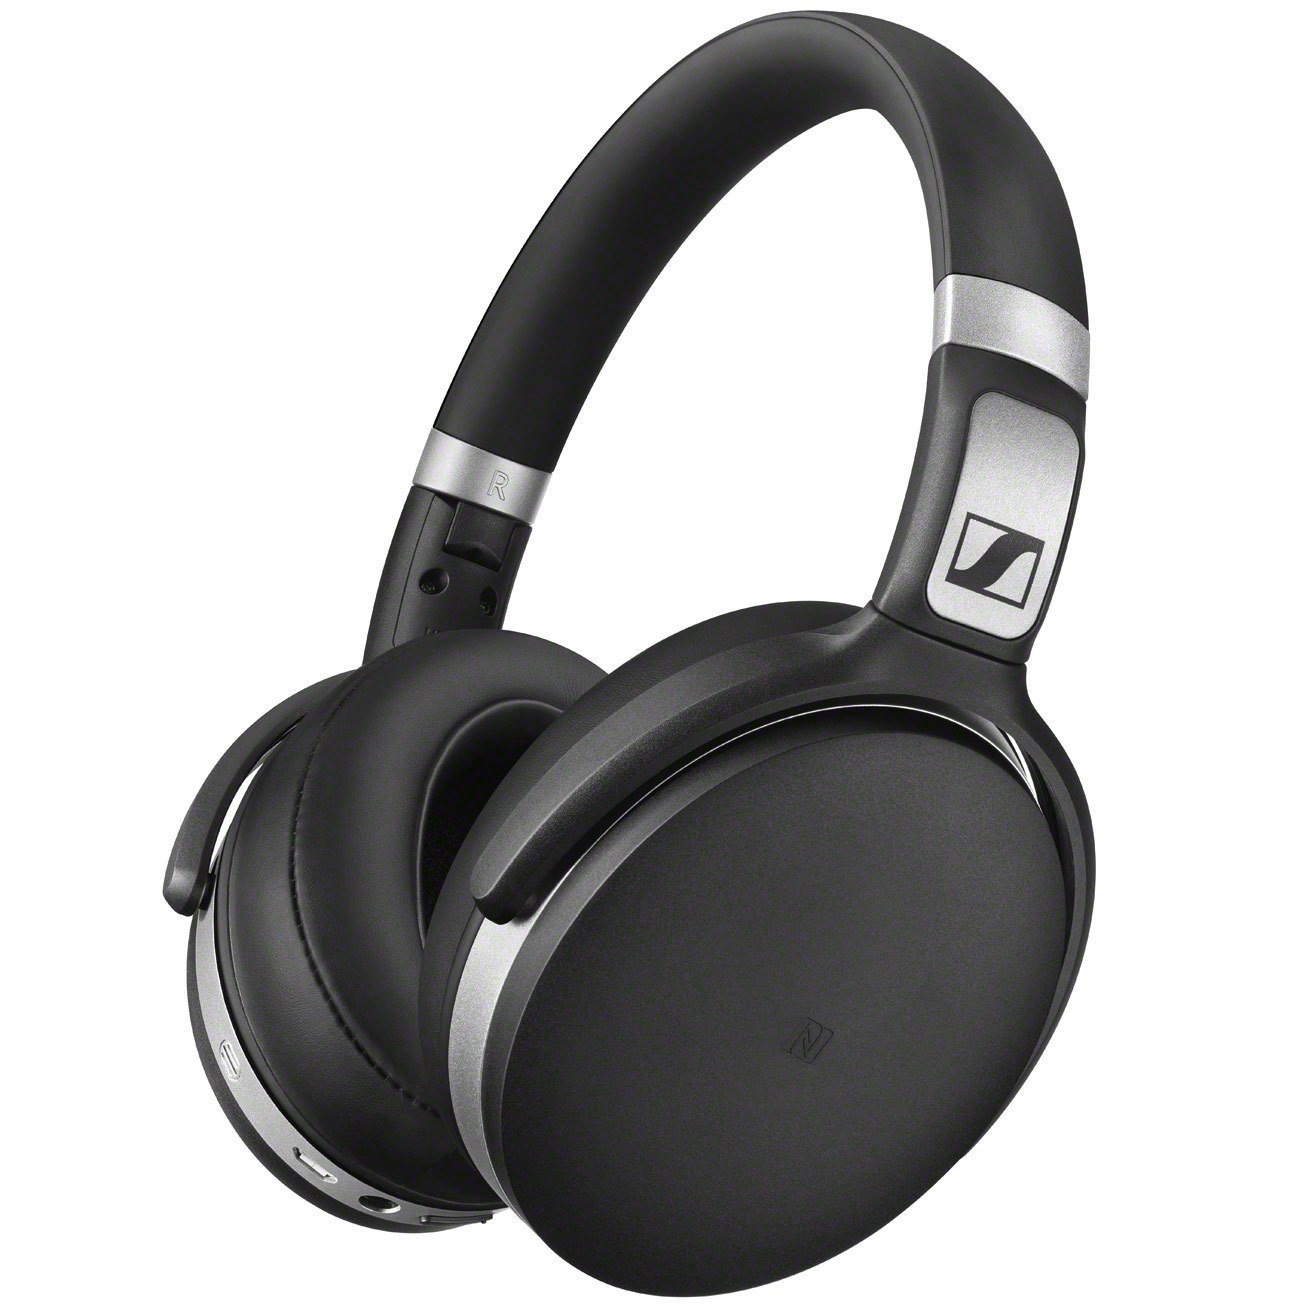 Buy Sennheiser  Blueooth Noise cancelling Headphone with Mic,  Black at Reliance Digital